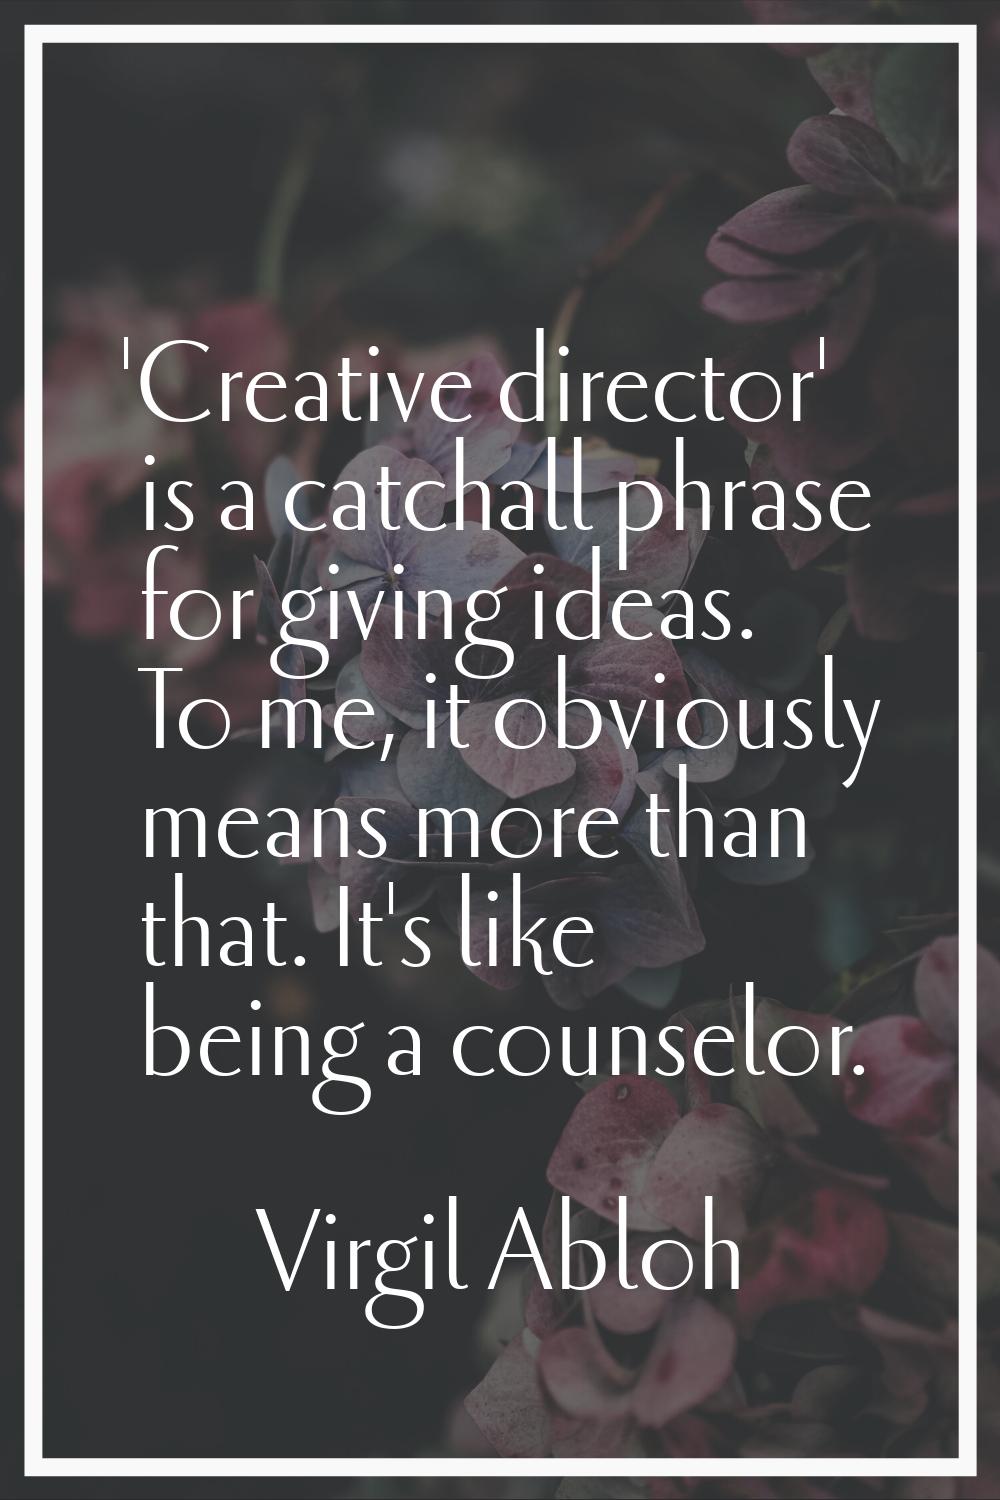 'Creative director' is a catchall phrase for giving ideas. To me, it obviously means more than that